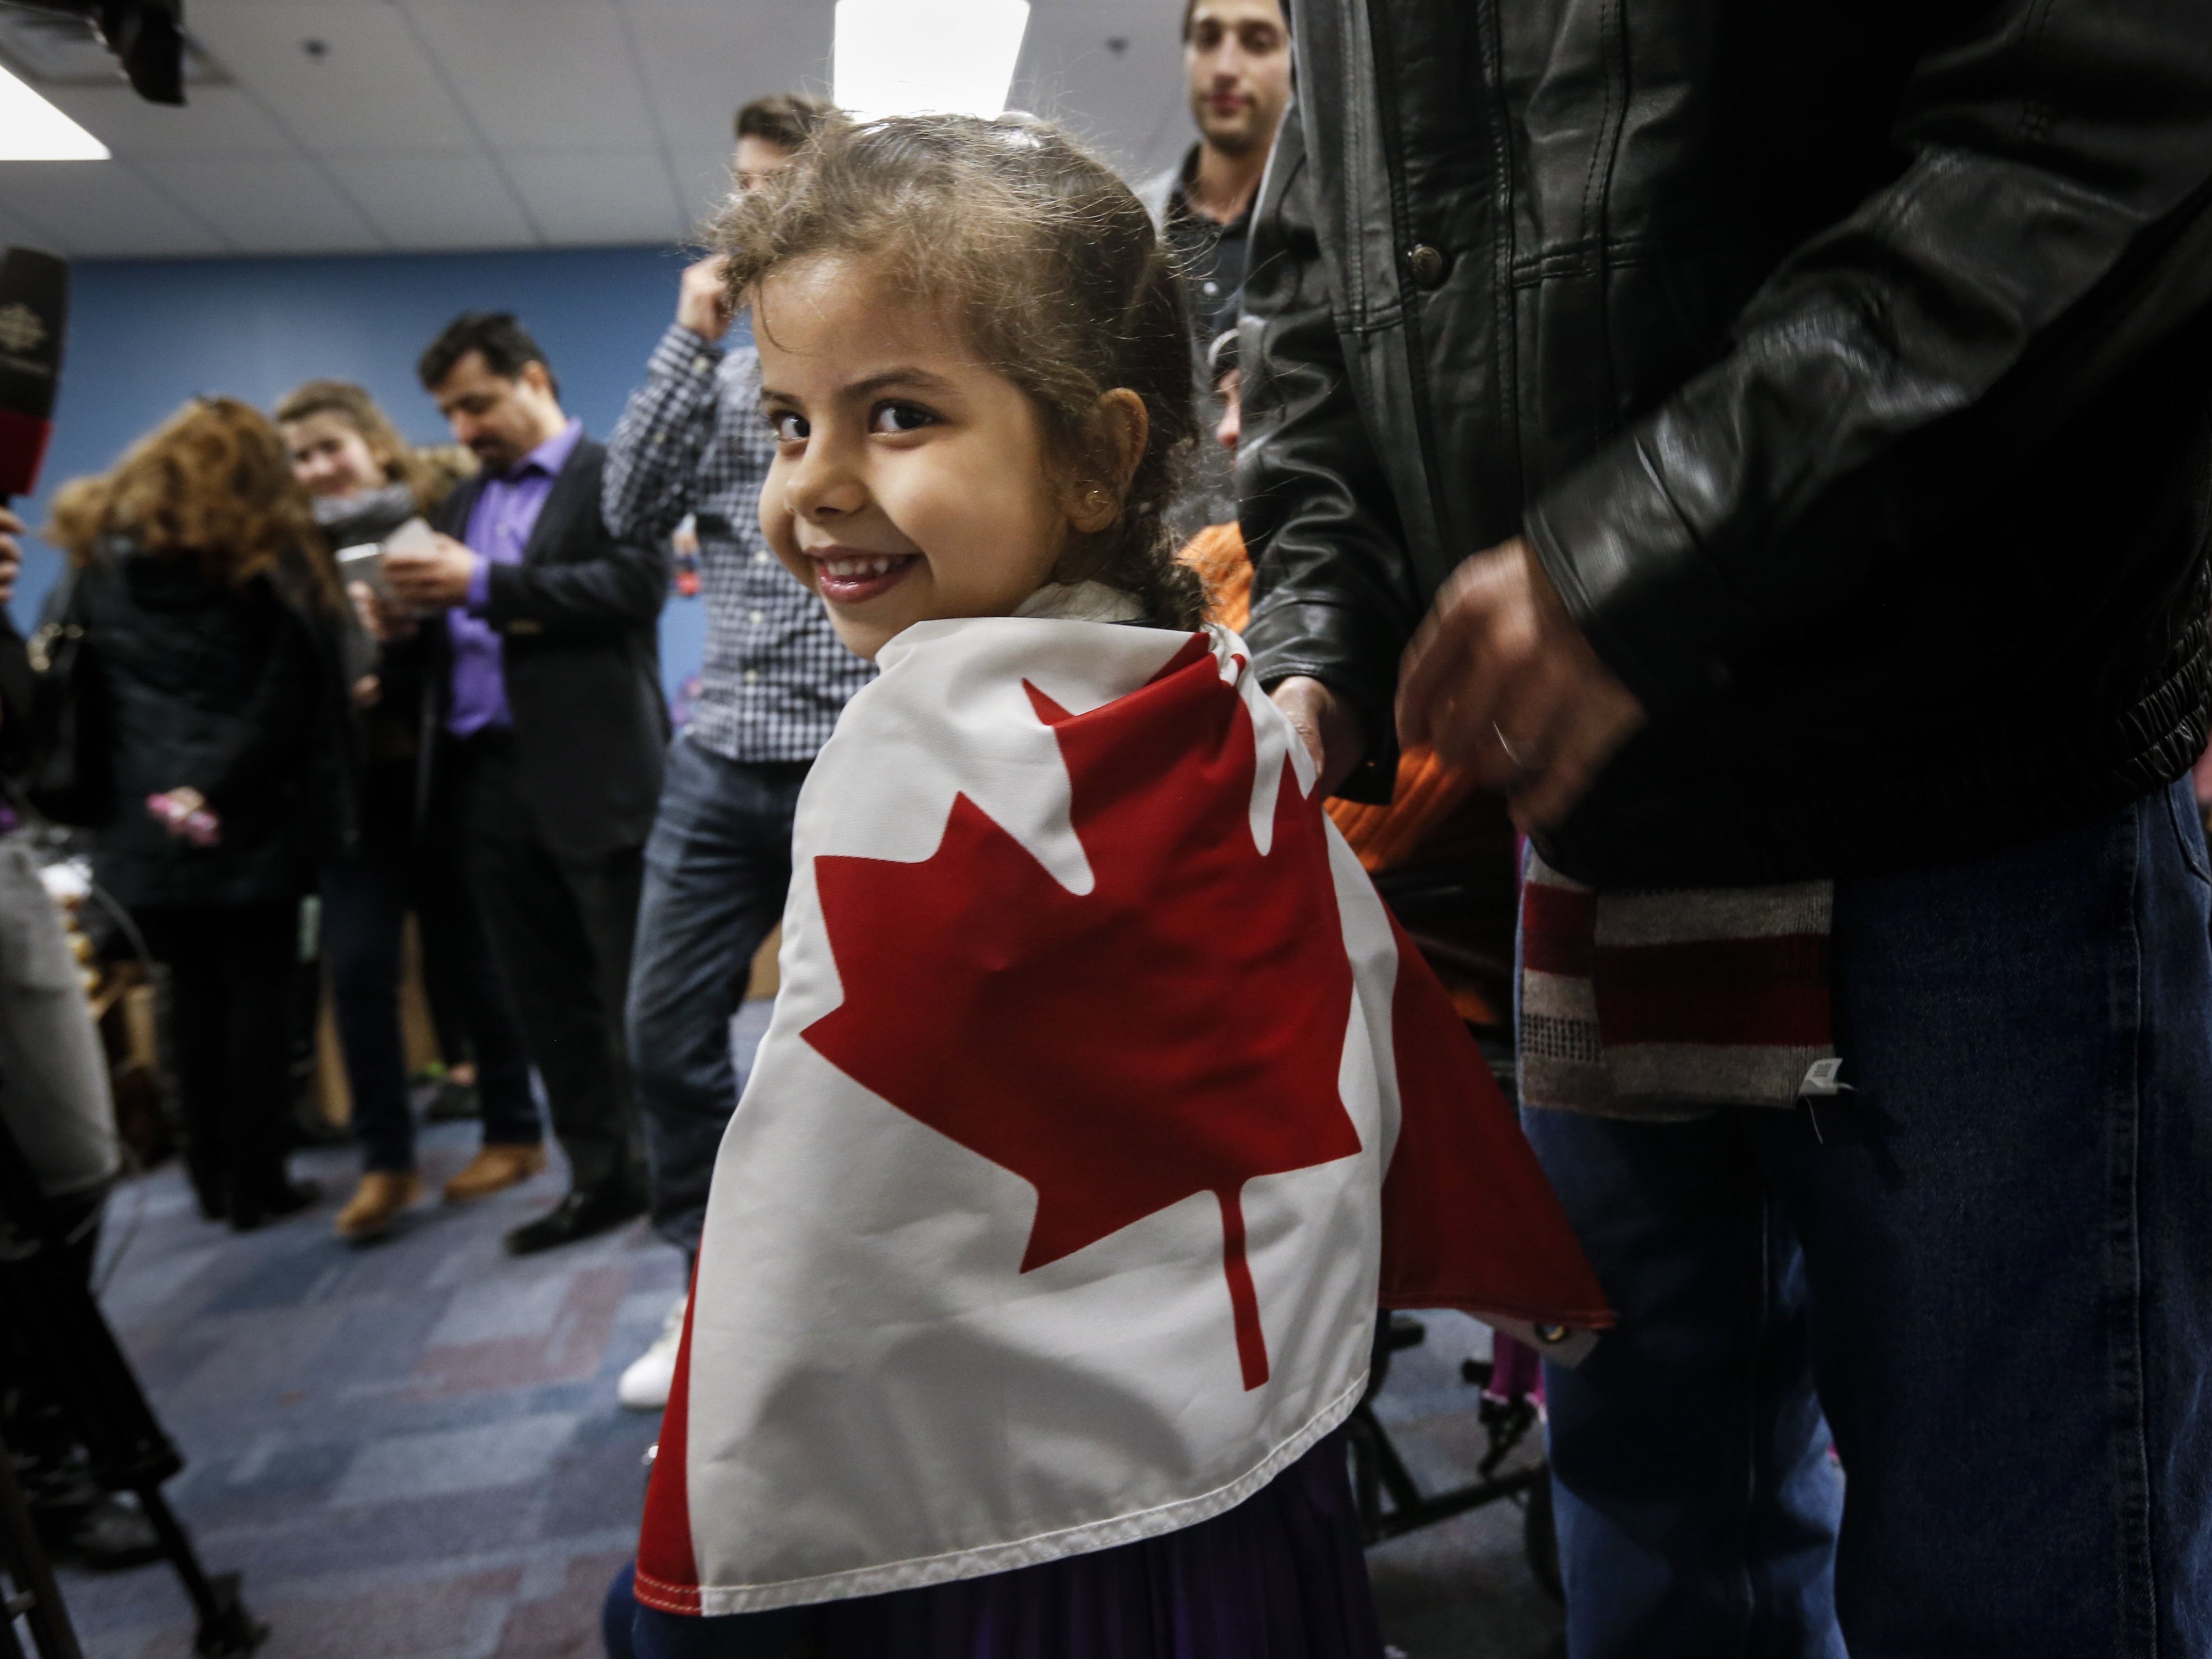 Canada Says It Has Met Its Goal Of Resettling 000 Syrian Refugees, The Two Way